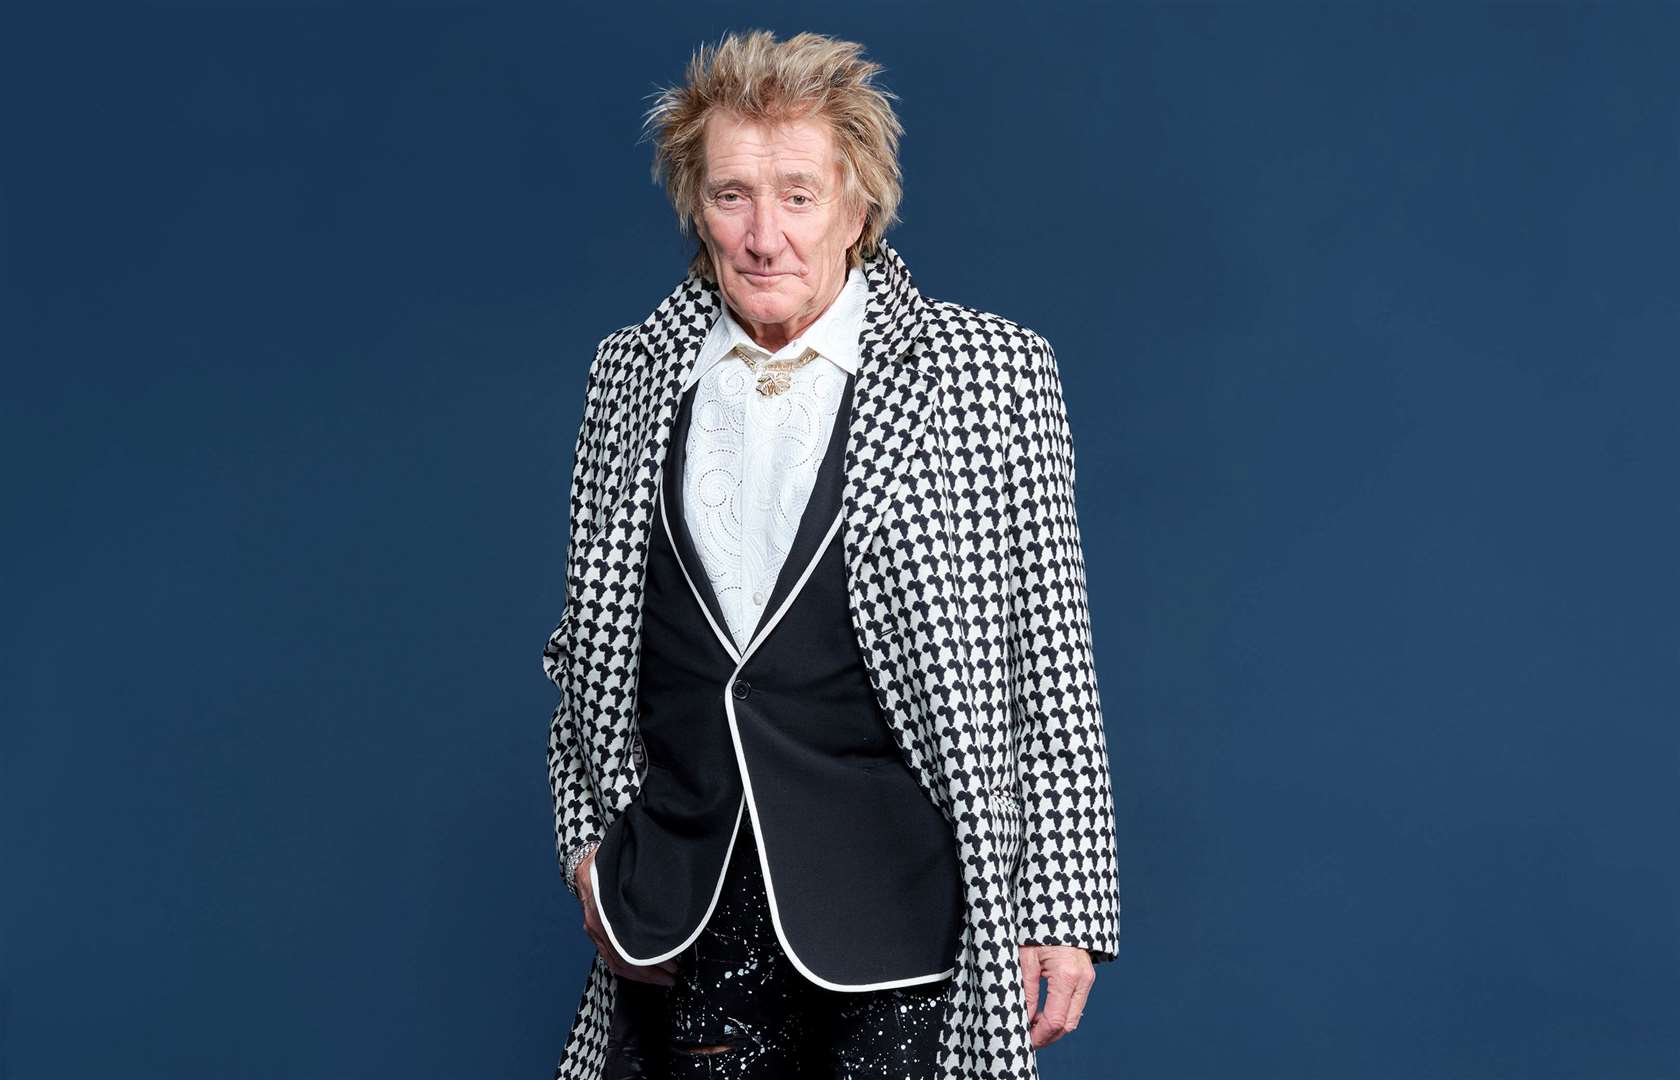 British rock and pop legend, Rod Stewart, will be making his Hootenanny debut. Picture: BBC Studios / Michael Leckie